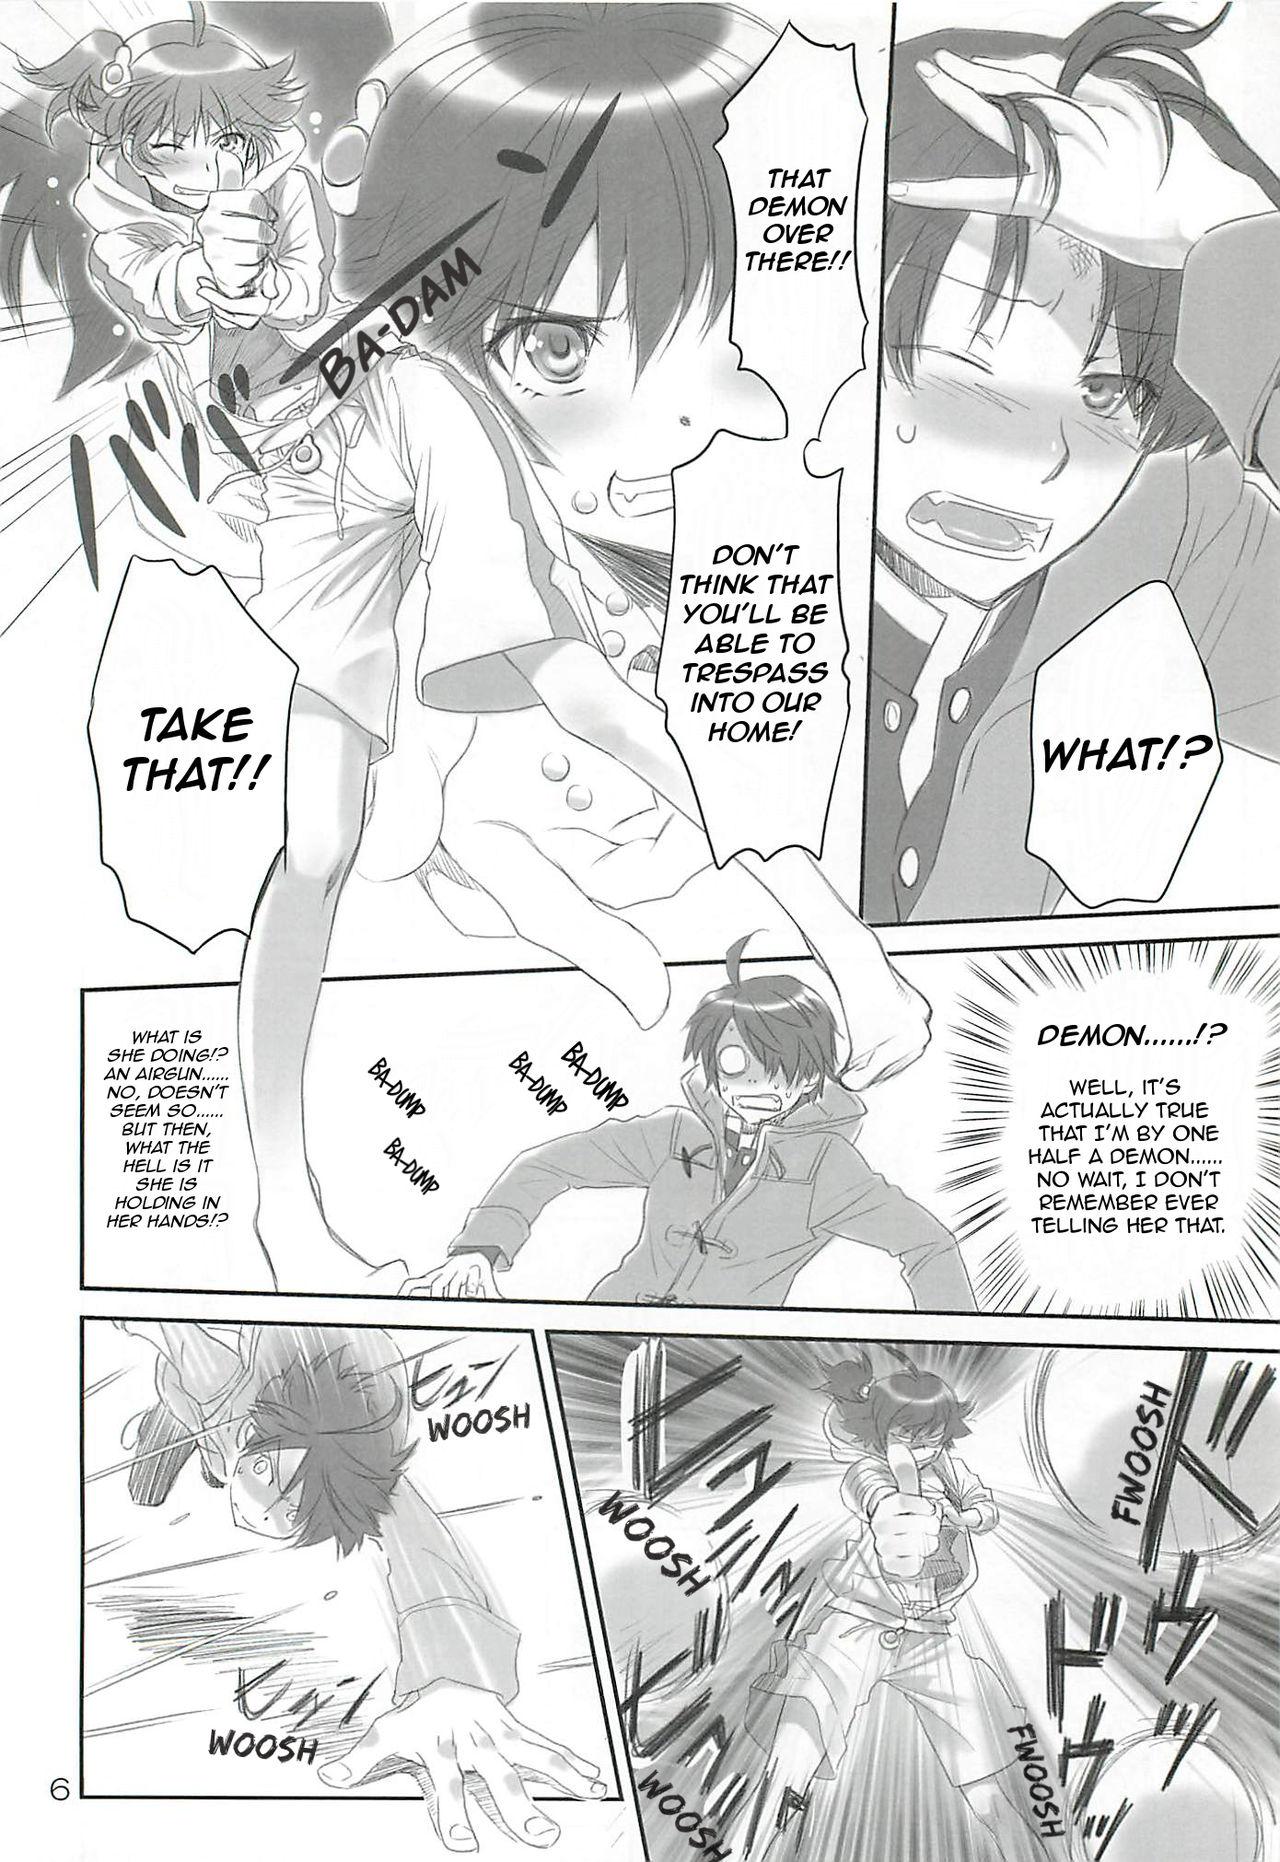 Vintage Brother and Sisters - Bakemonogatari Massages - Page 5